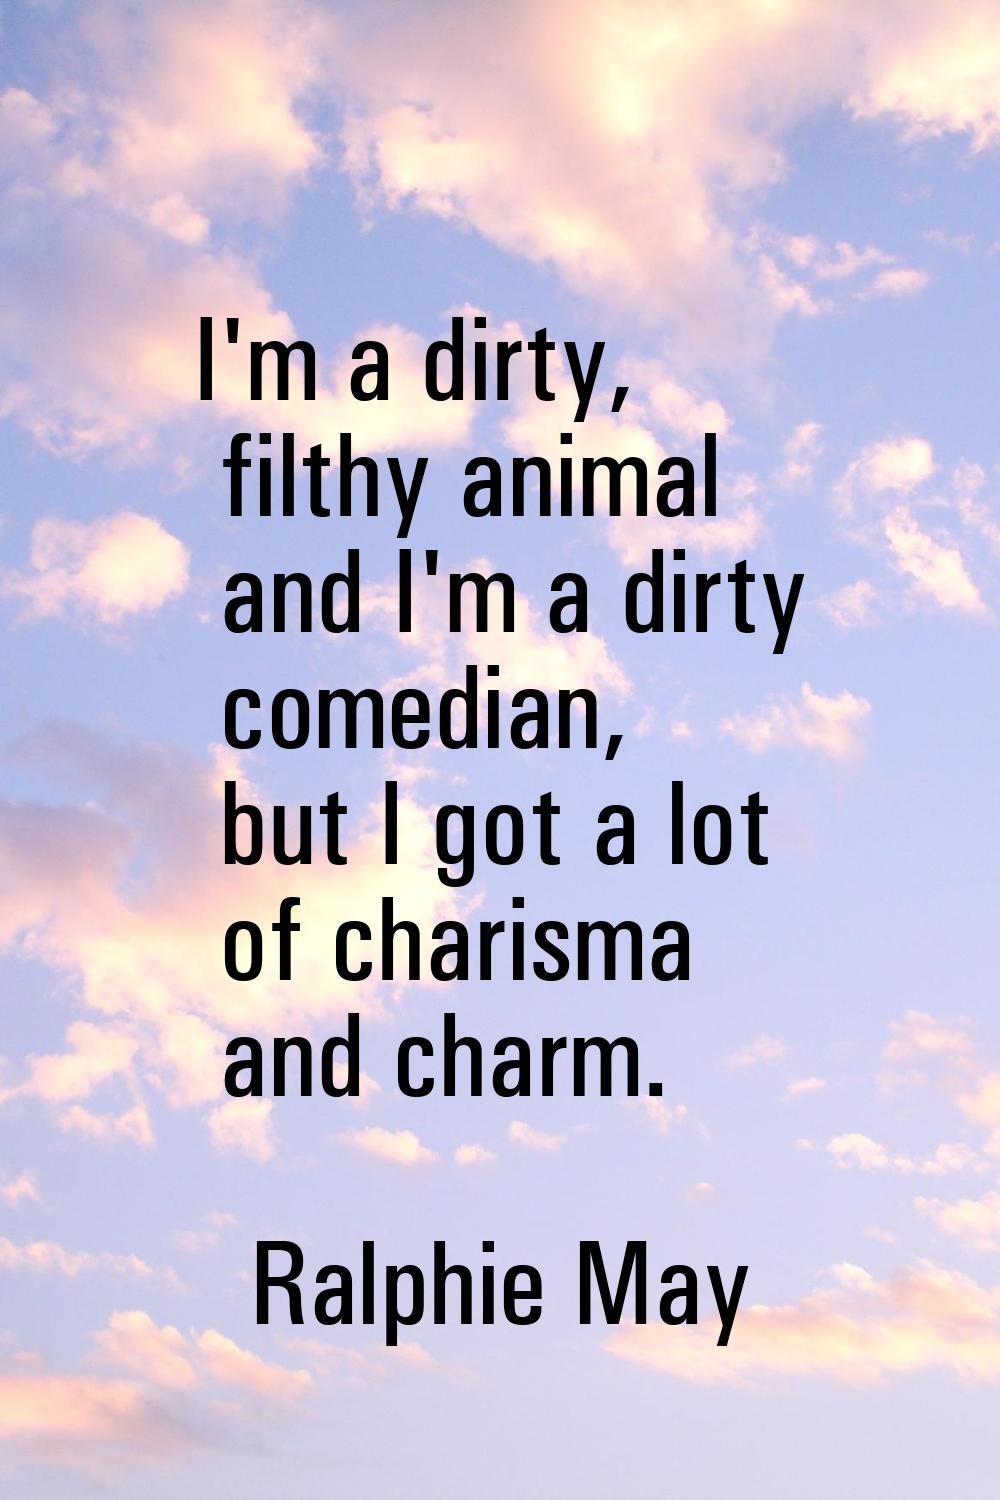 I'm a dirty, filthy animal and I'm a dirty comedian, but I got a lot of charisma and charm.